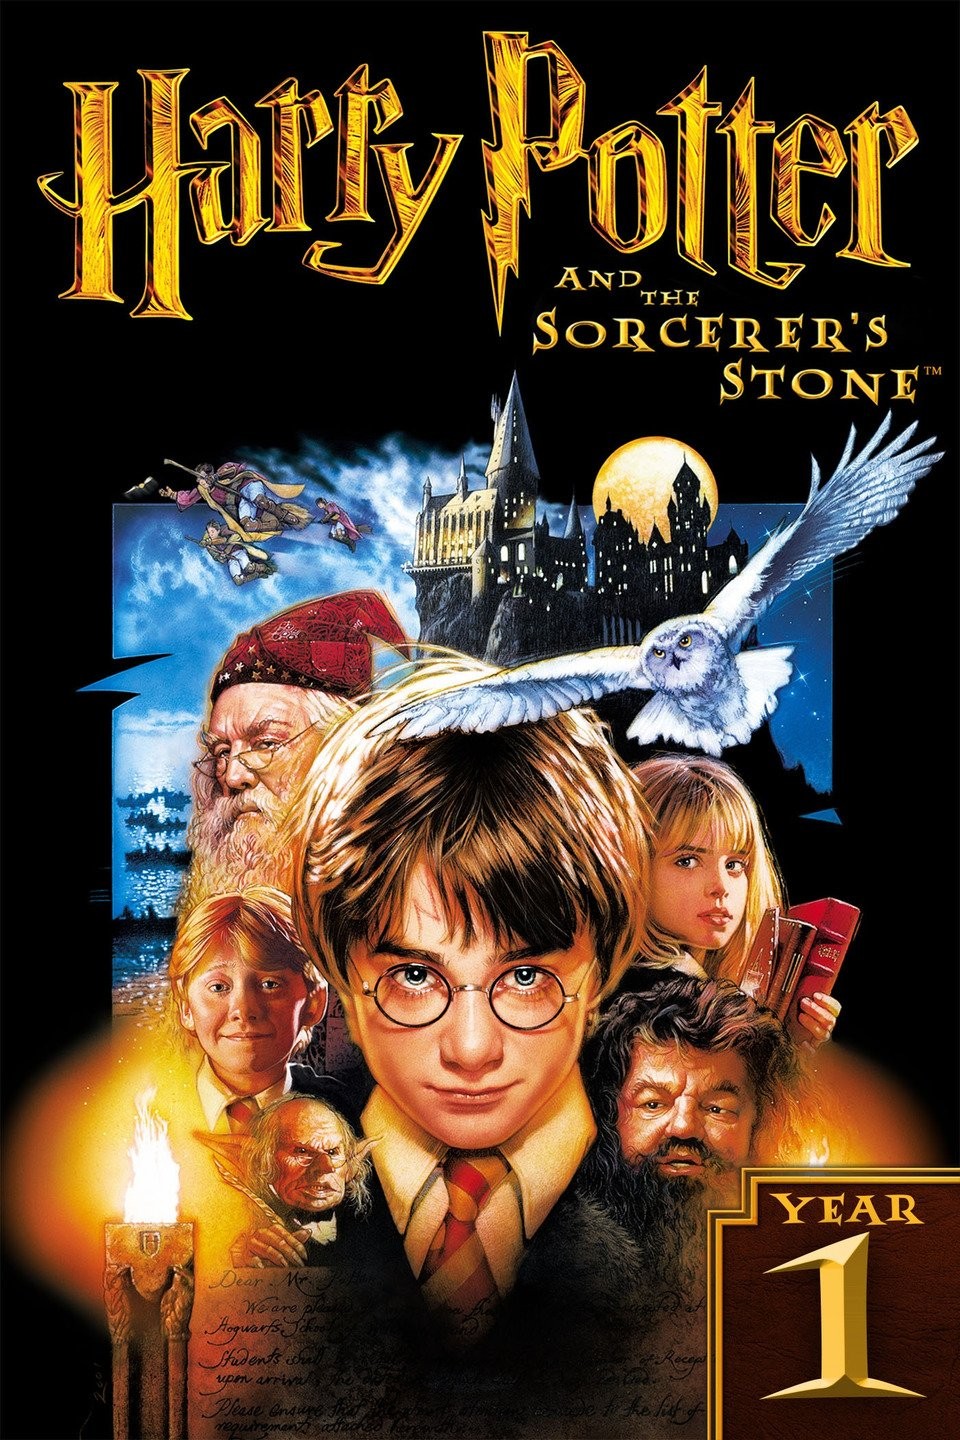 PG-13 rating is perfect for Potter 4